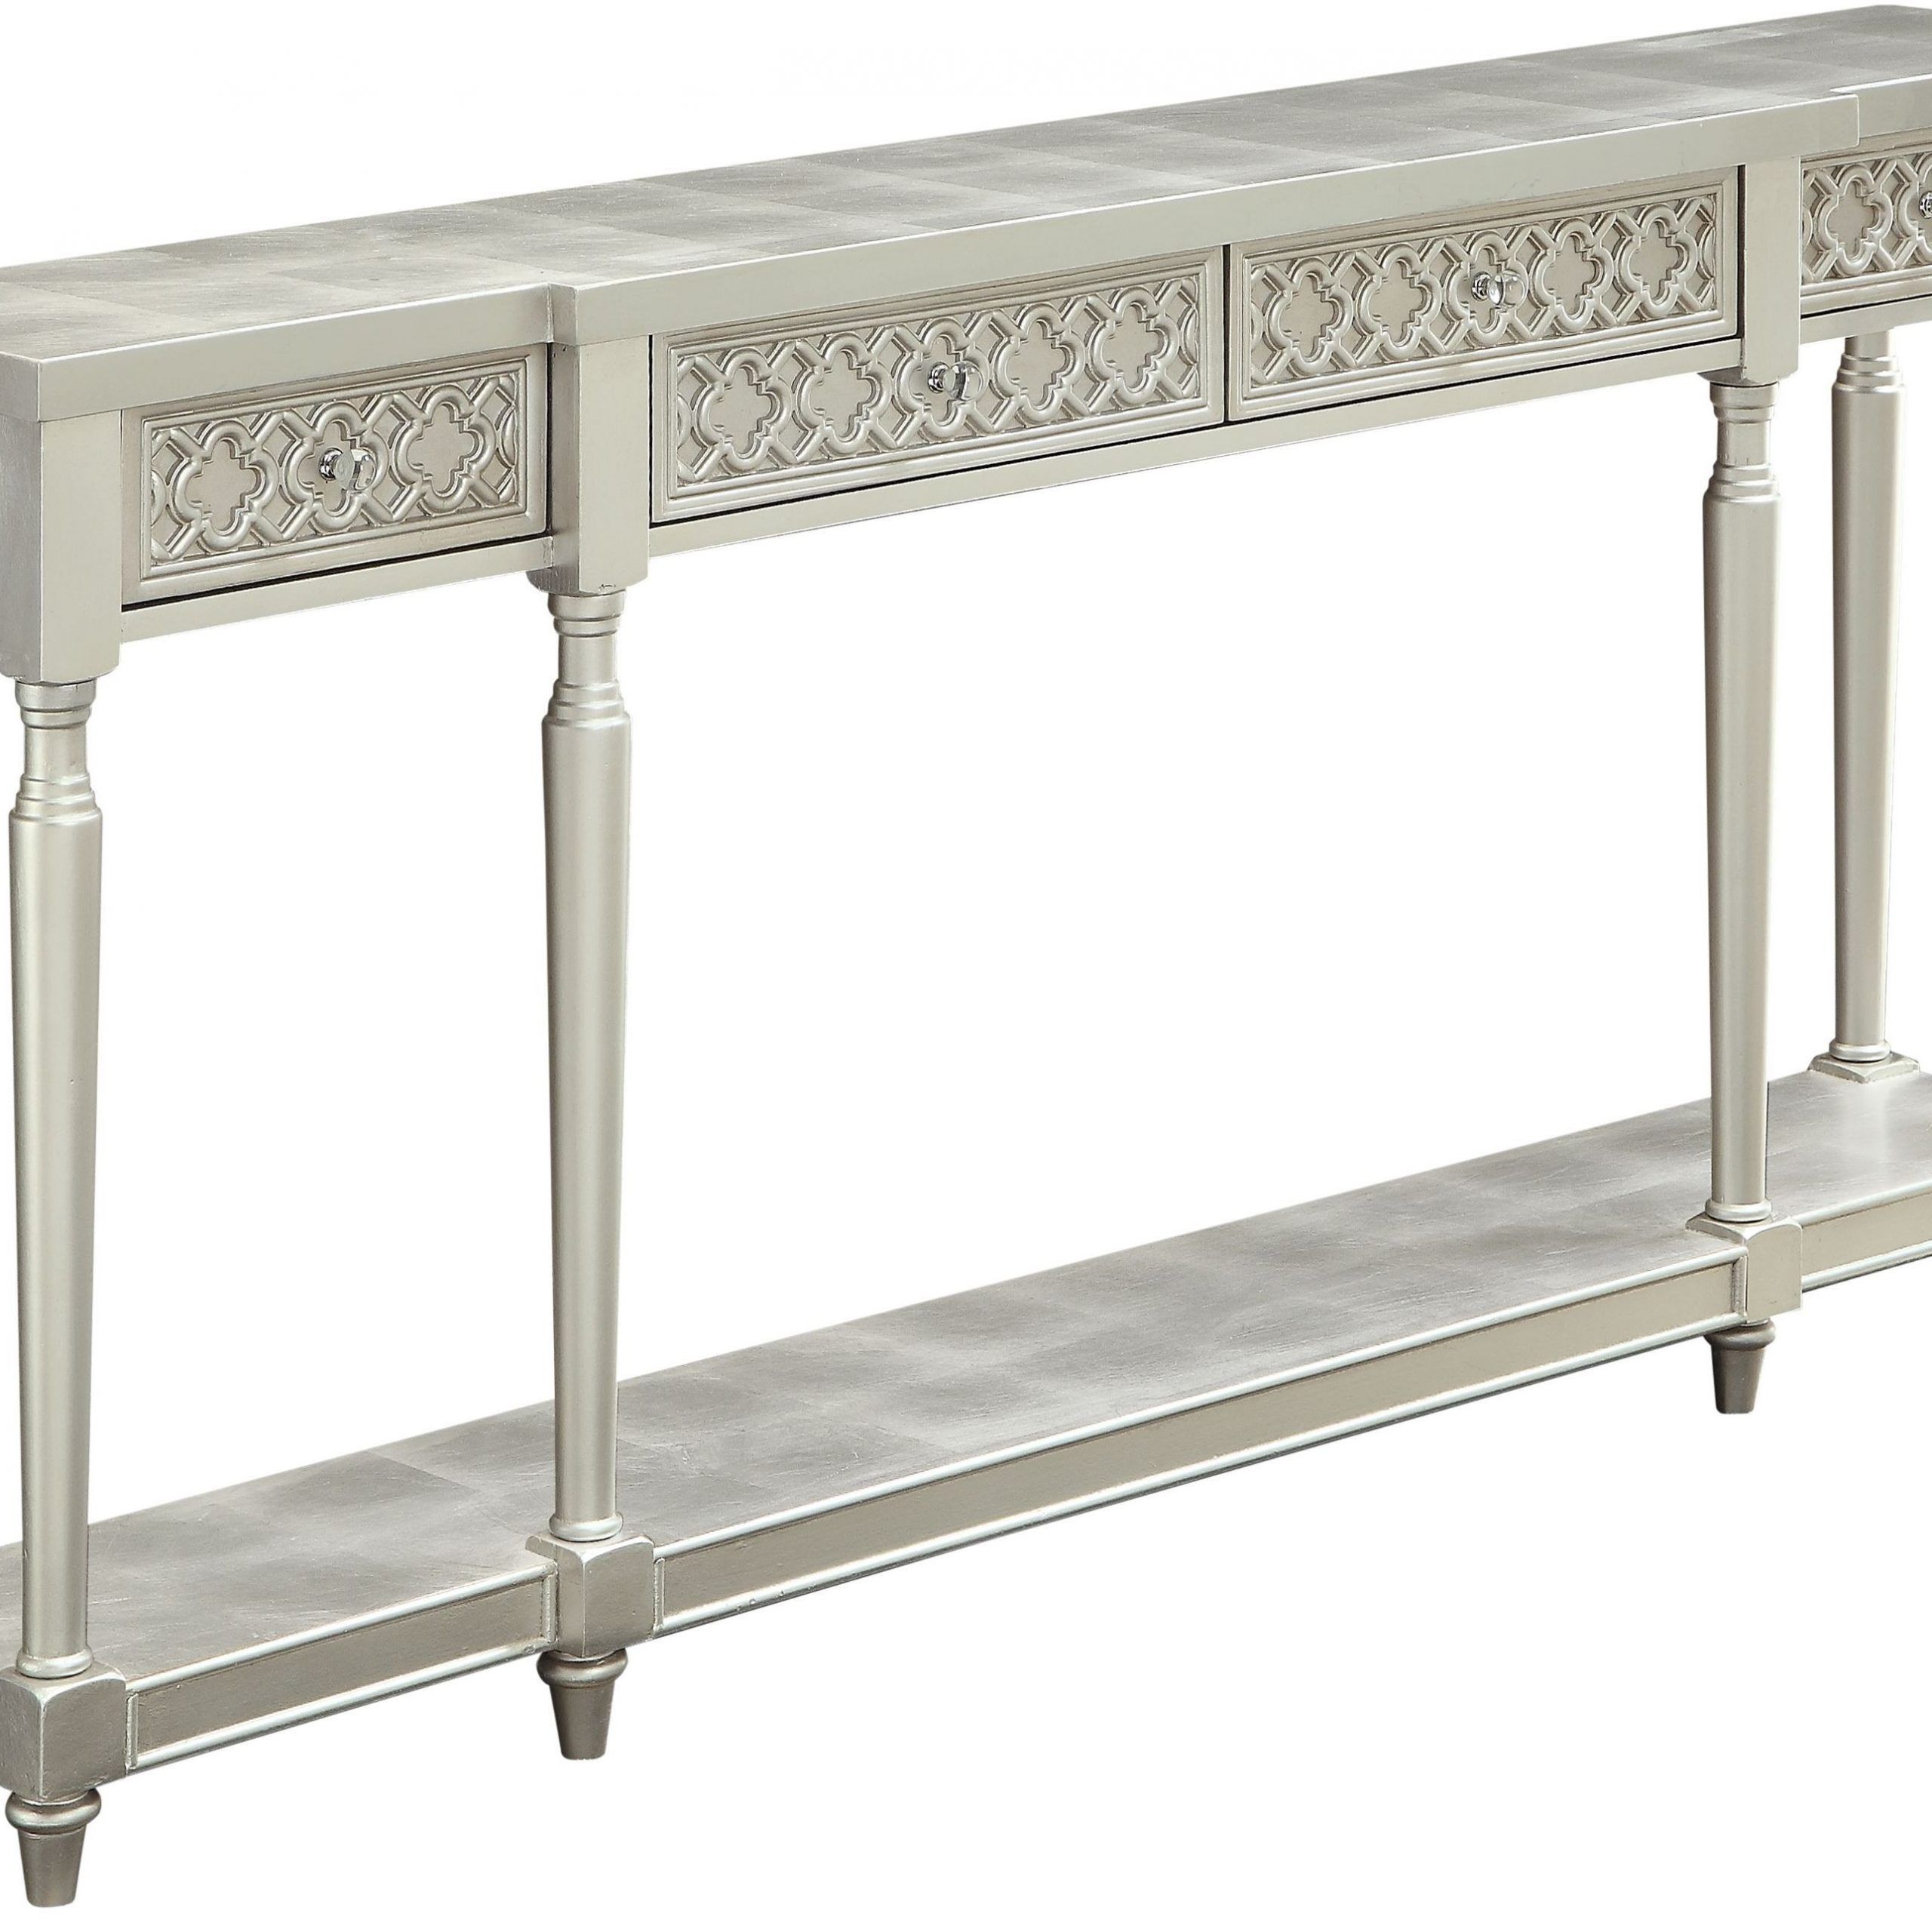 Margo Silver Leaf 4 Drawer Console Table From Coast To Coast (70777 Pertaining To Leaf Round Console Tables (View 6 of 20)